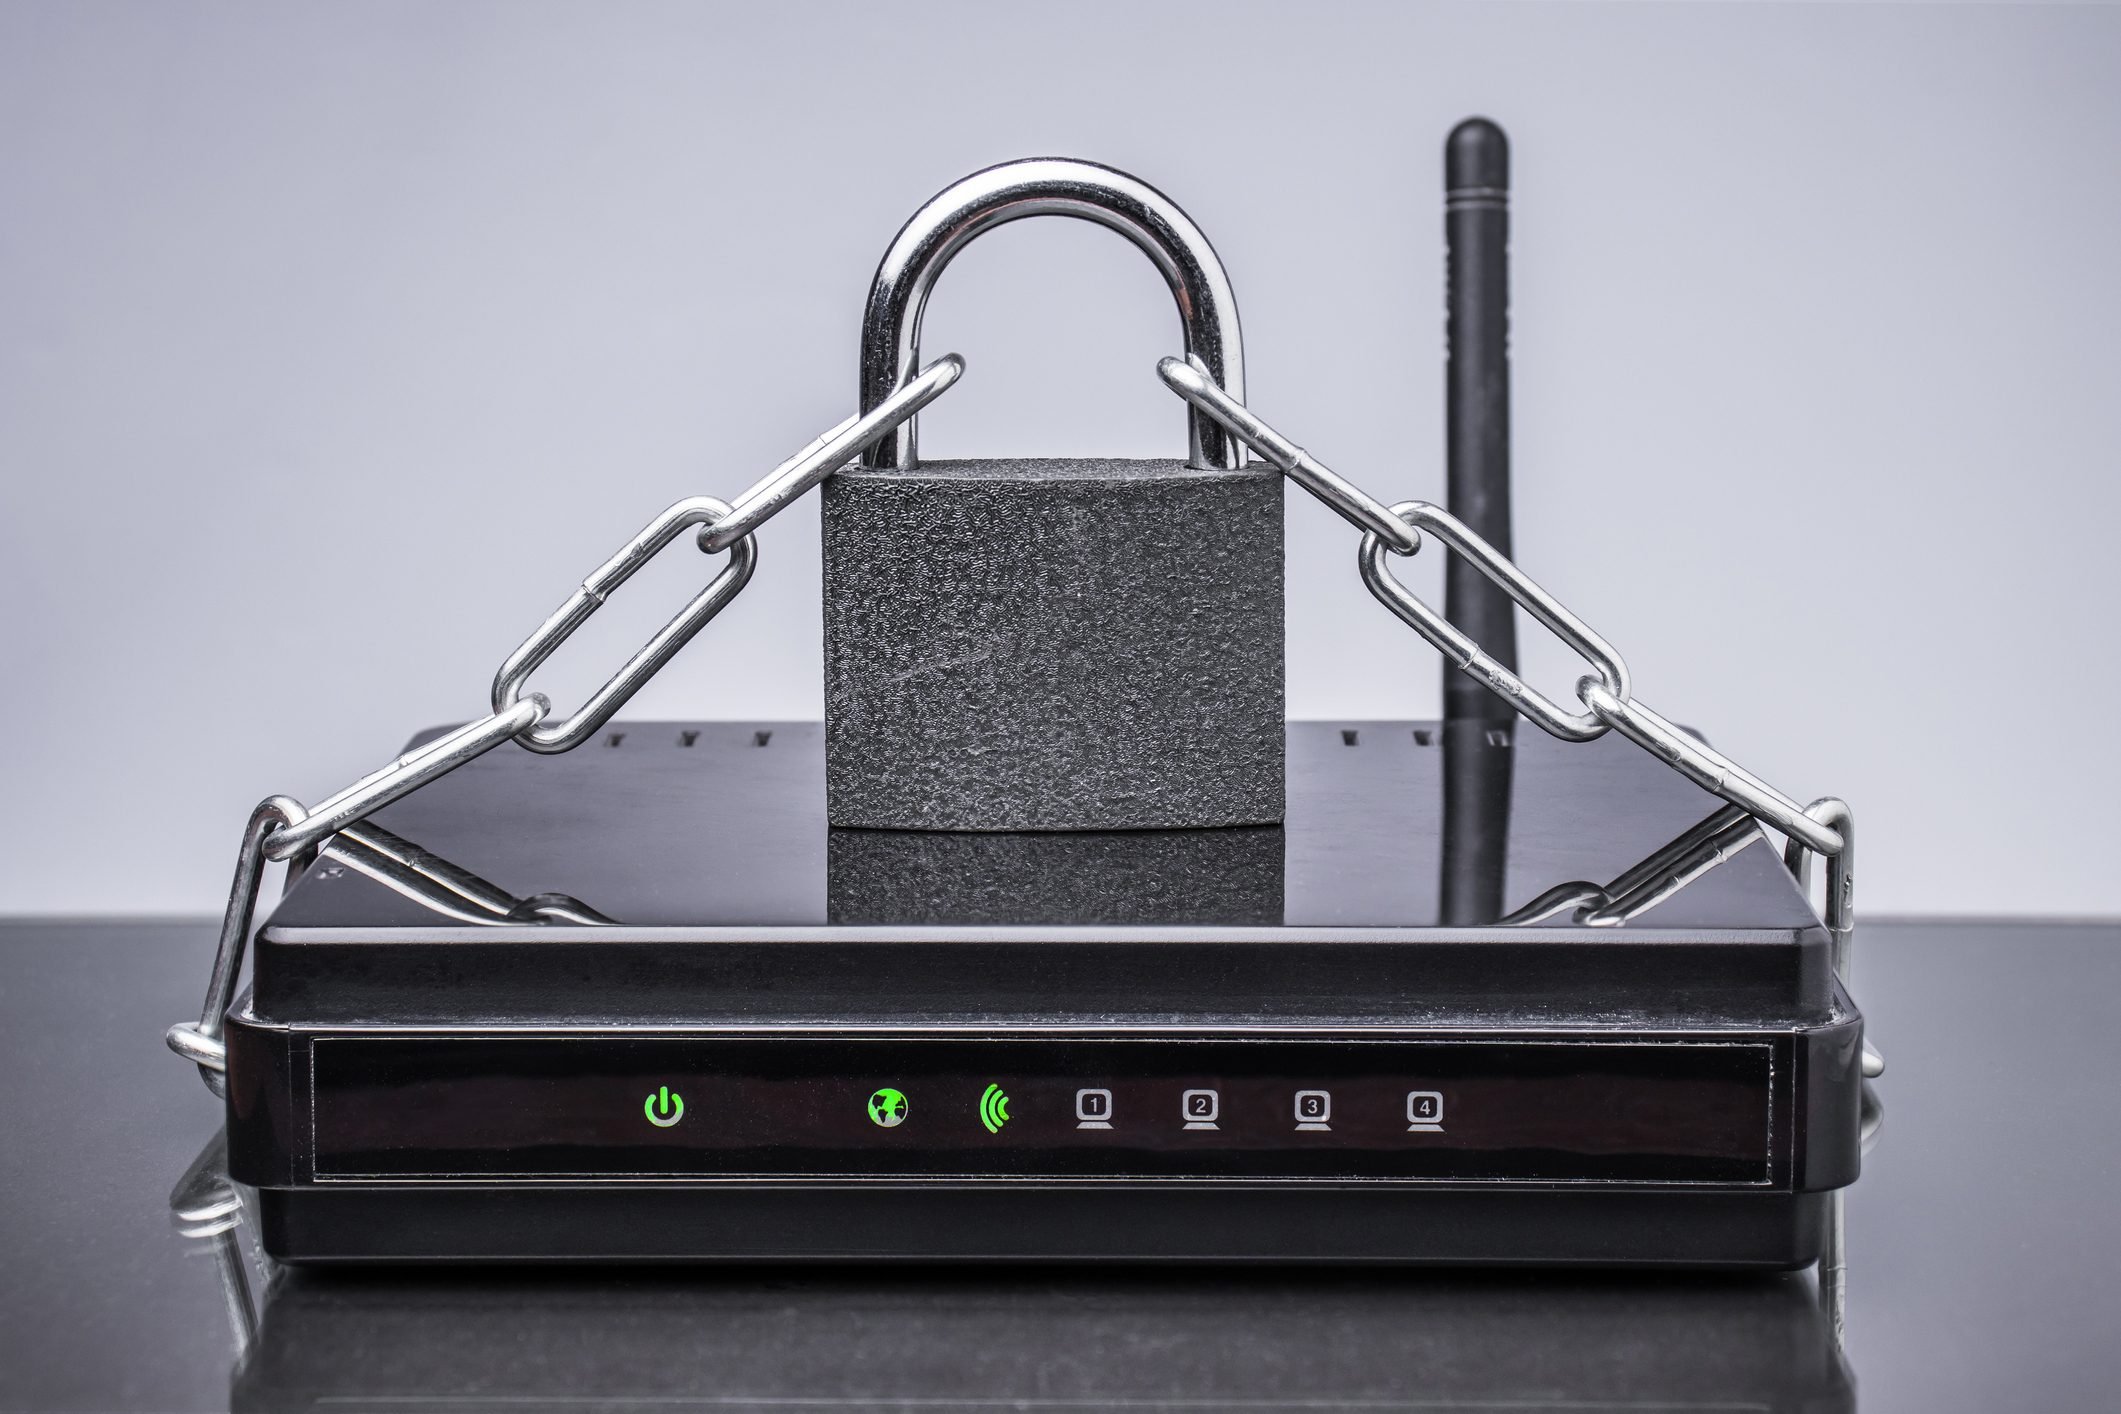 Are Hackers Targeting Your Wi-Fi Router? Here's How To Stop Them